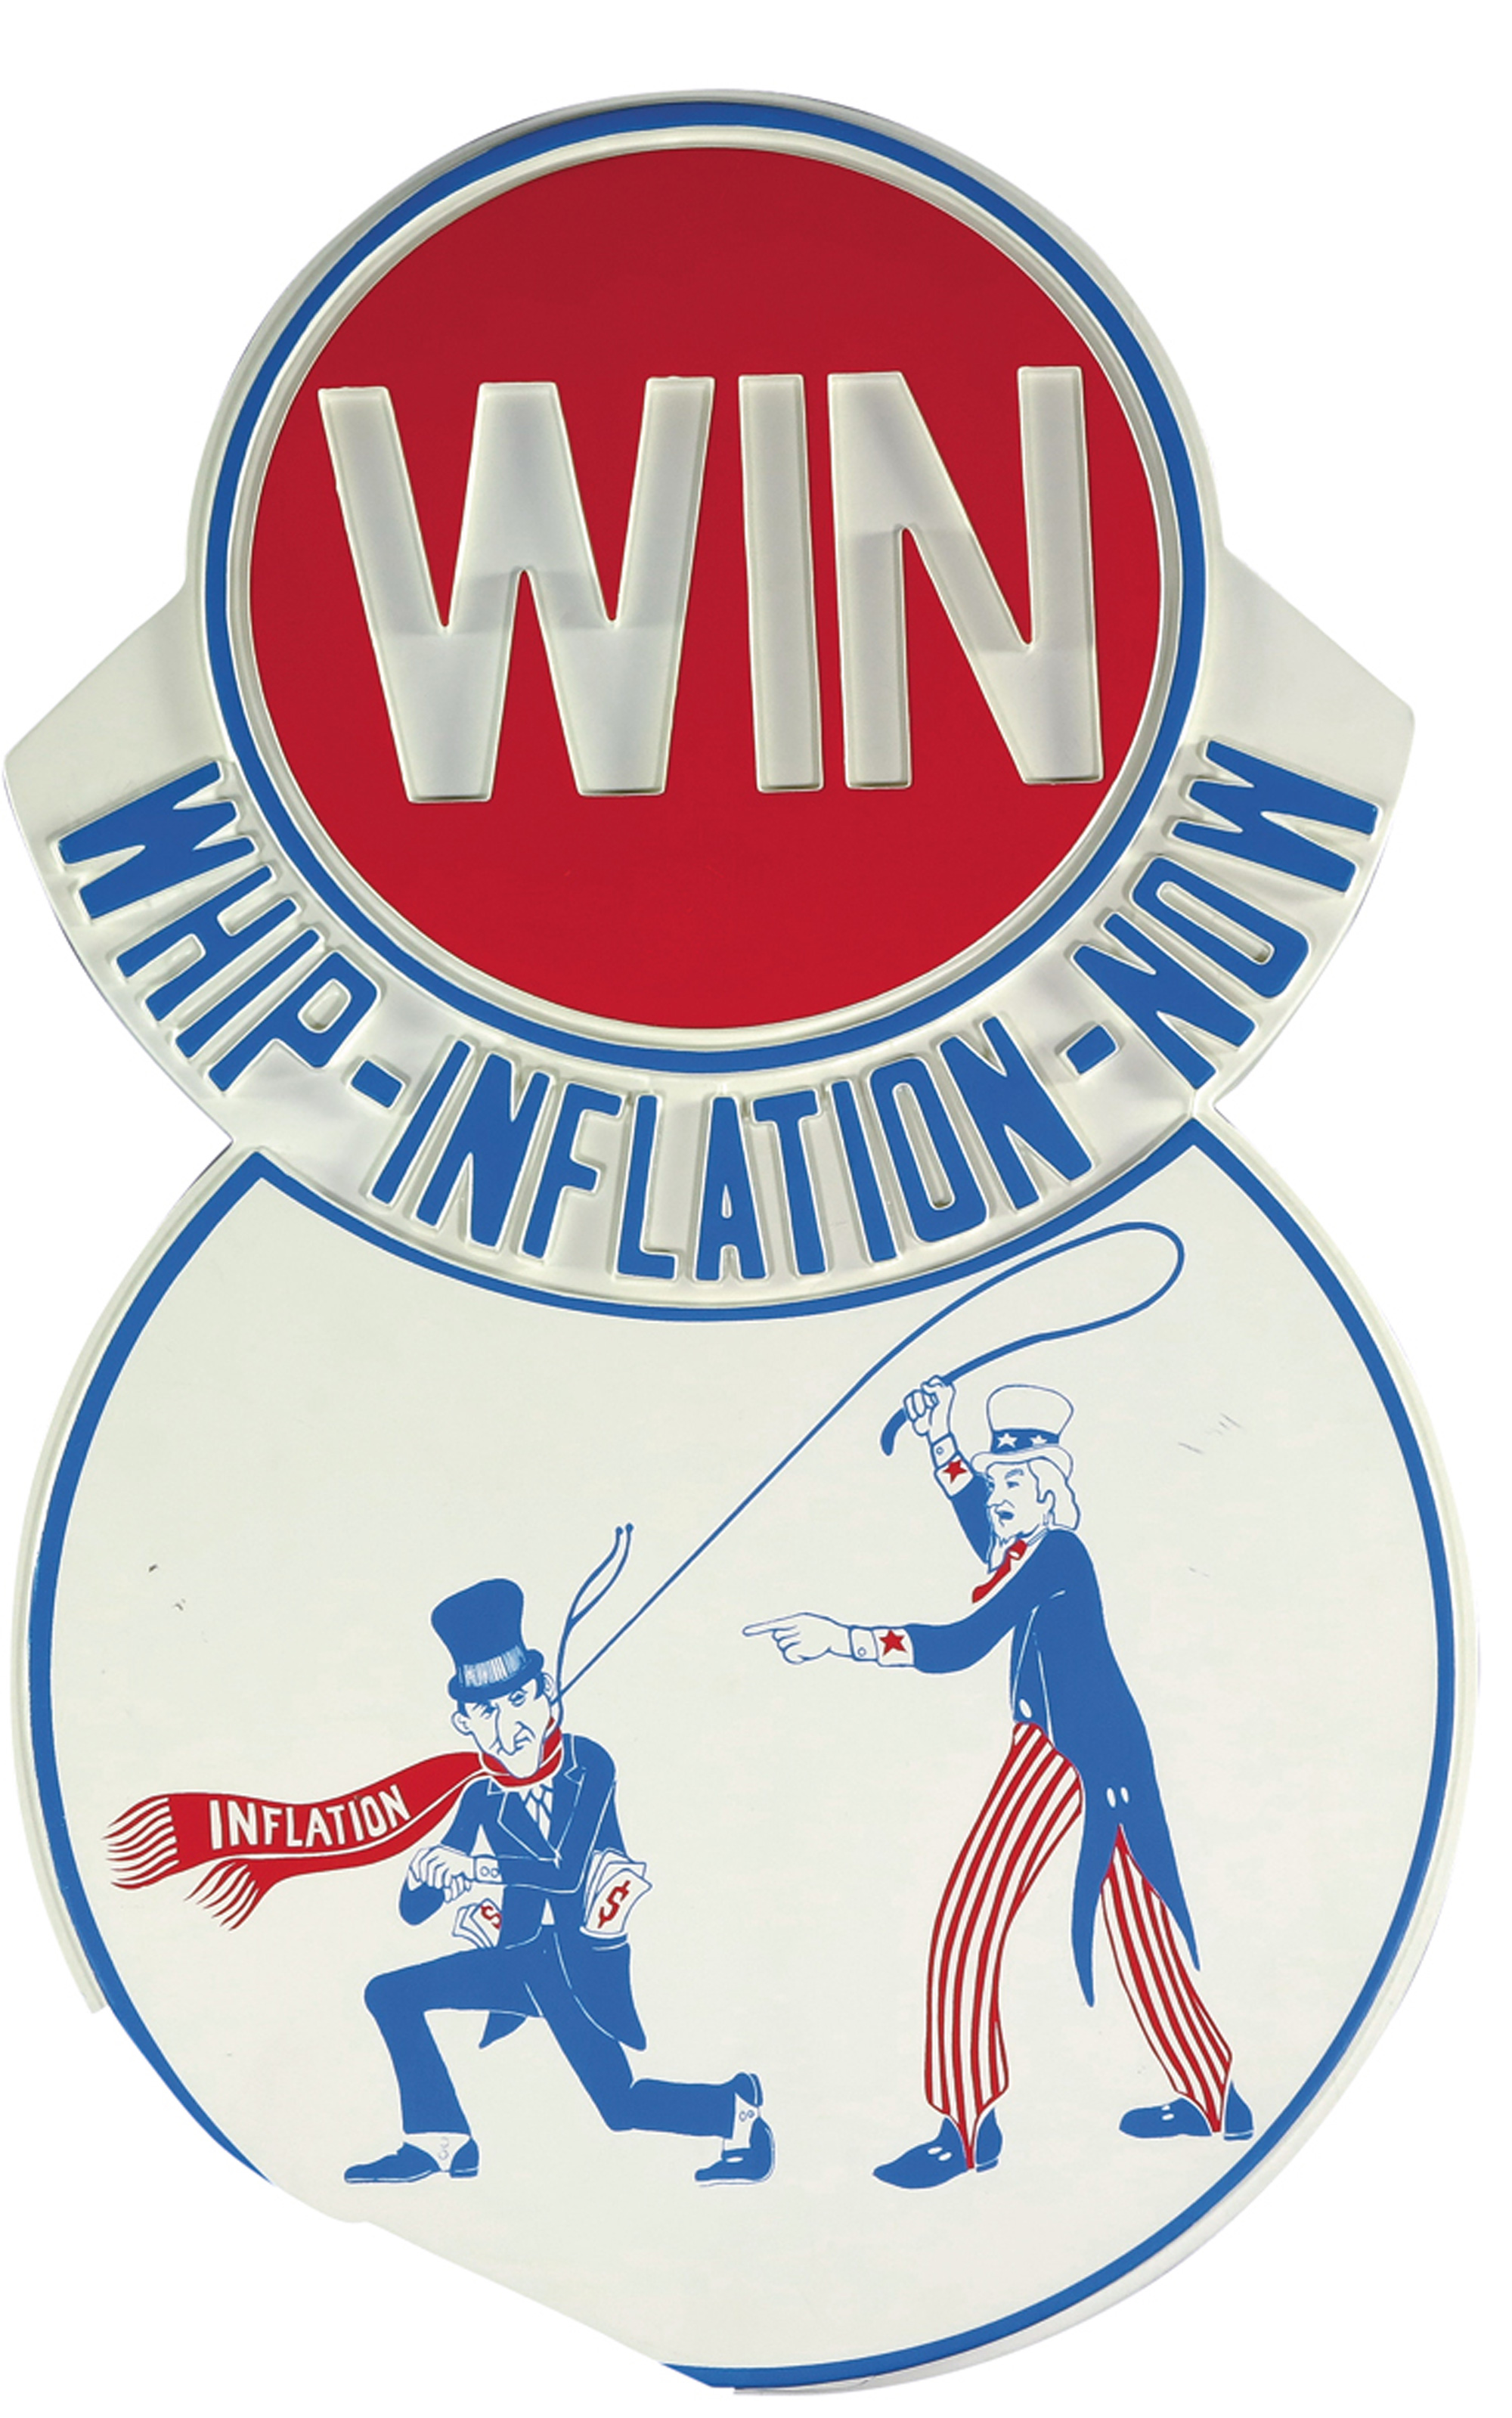 The sign sent in December nineteen seventy-four to President Gerald Ford by Robert Slavsky, president of Shaw and Slavsky, Incorporated., a signage, fixtures, and graphics company based in Detroit. It depicts Uncle Sam whipping a character labeled “Inflation.”